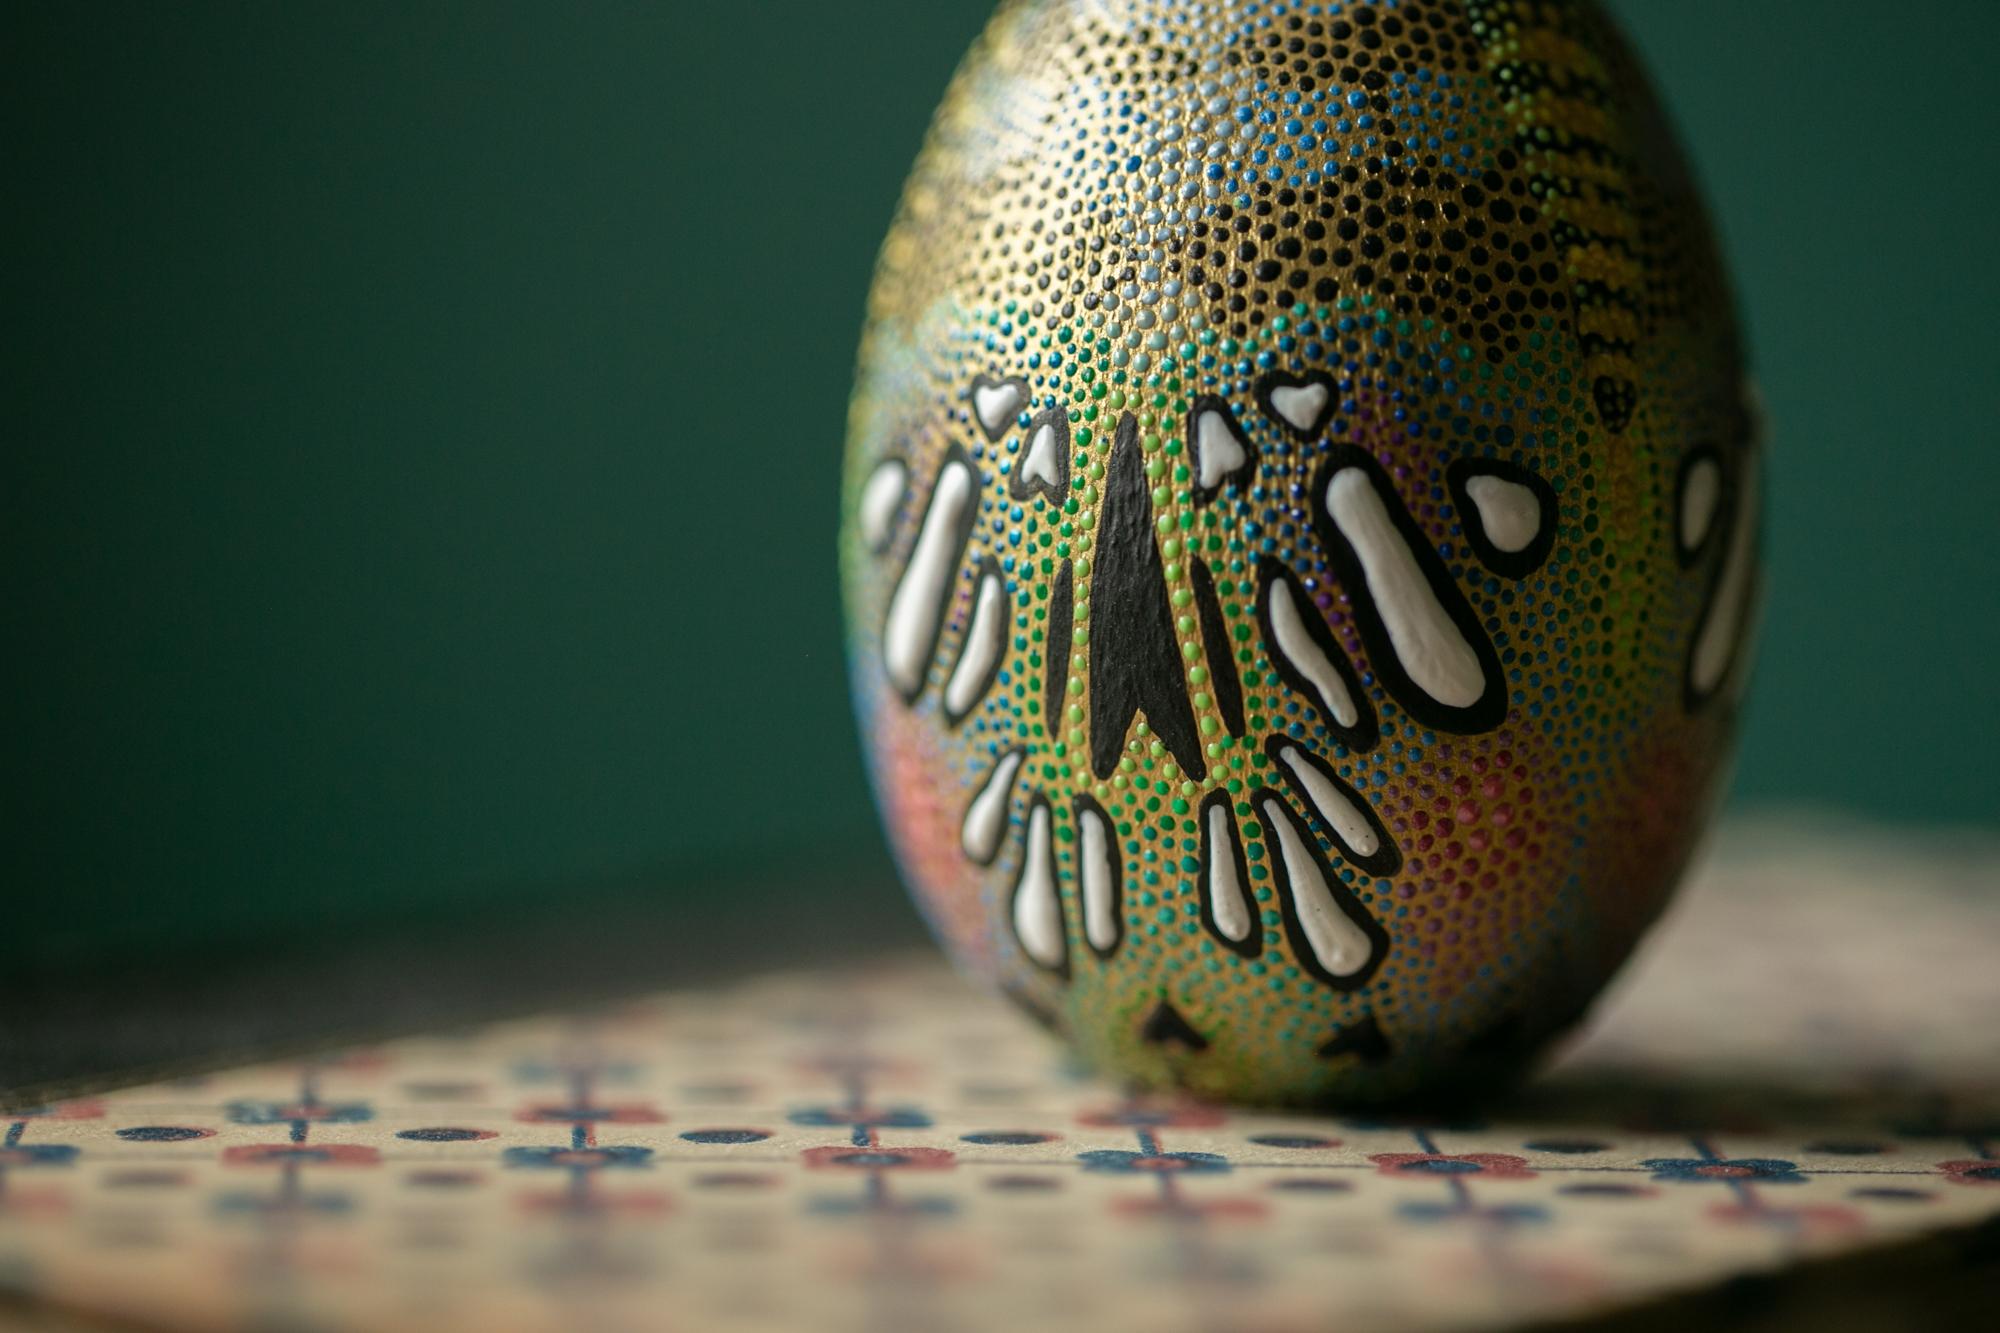 This abstract egg sculpture titled 